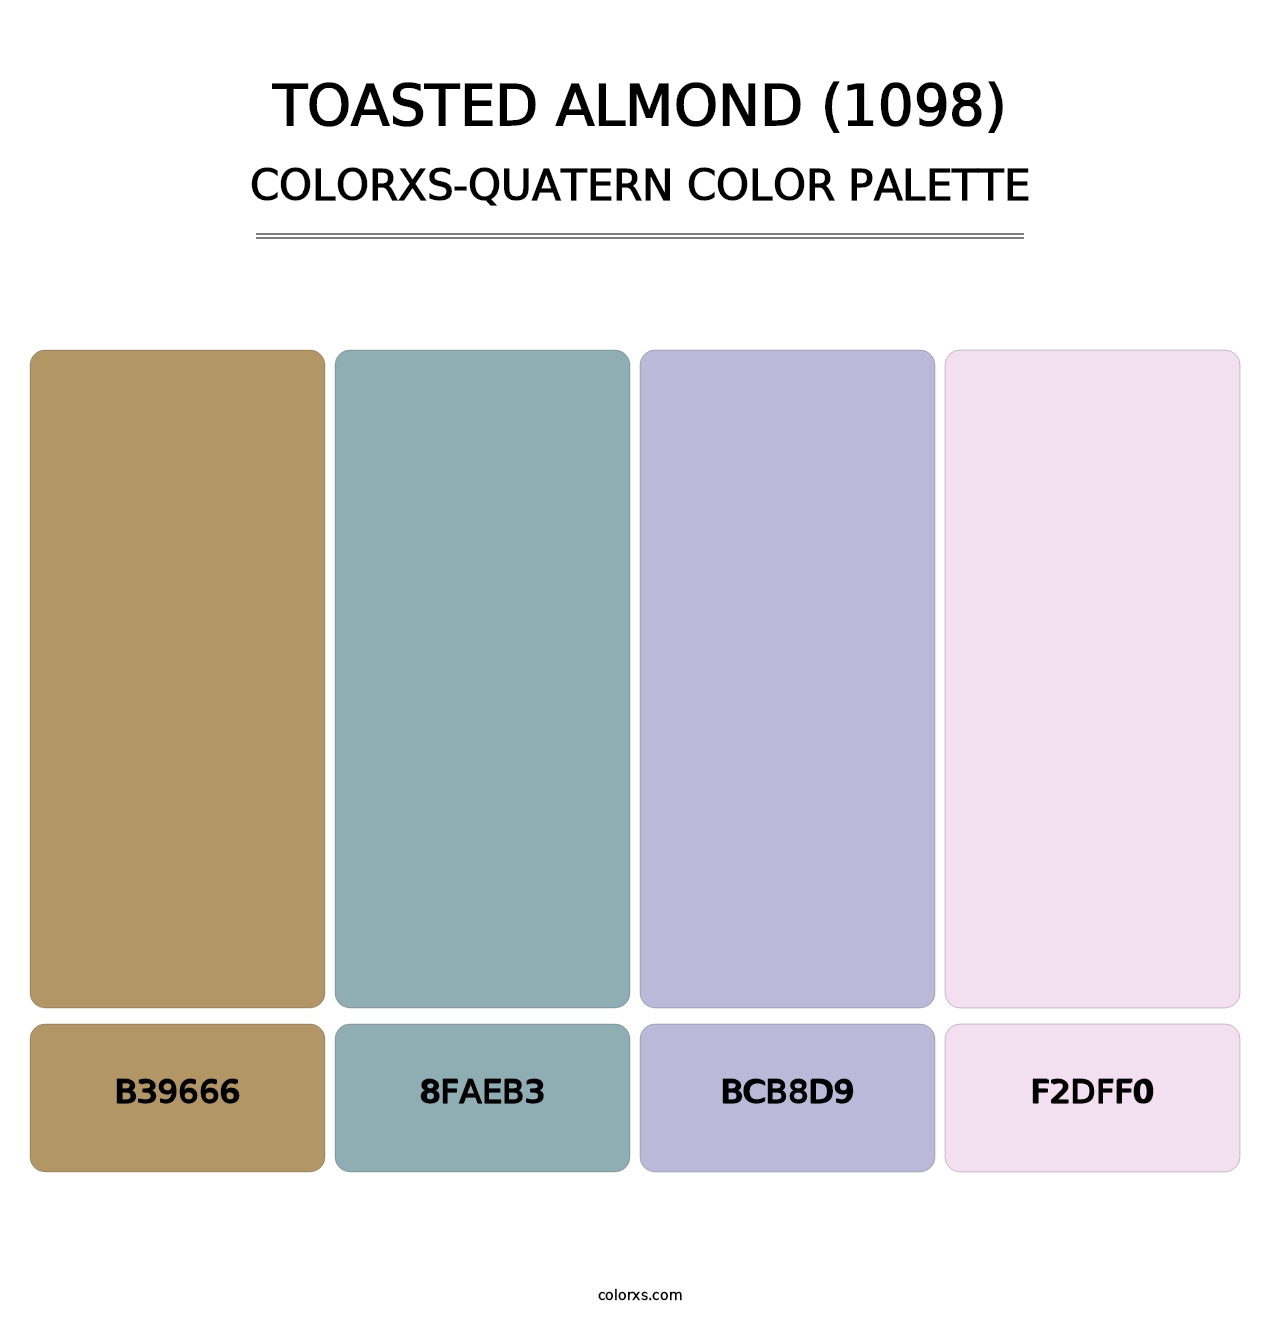 Toasted Almond (1098) - Colorxs Quatern Palette